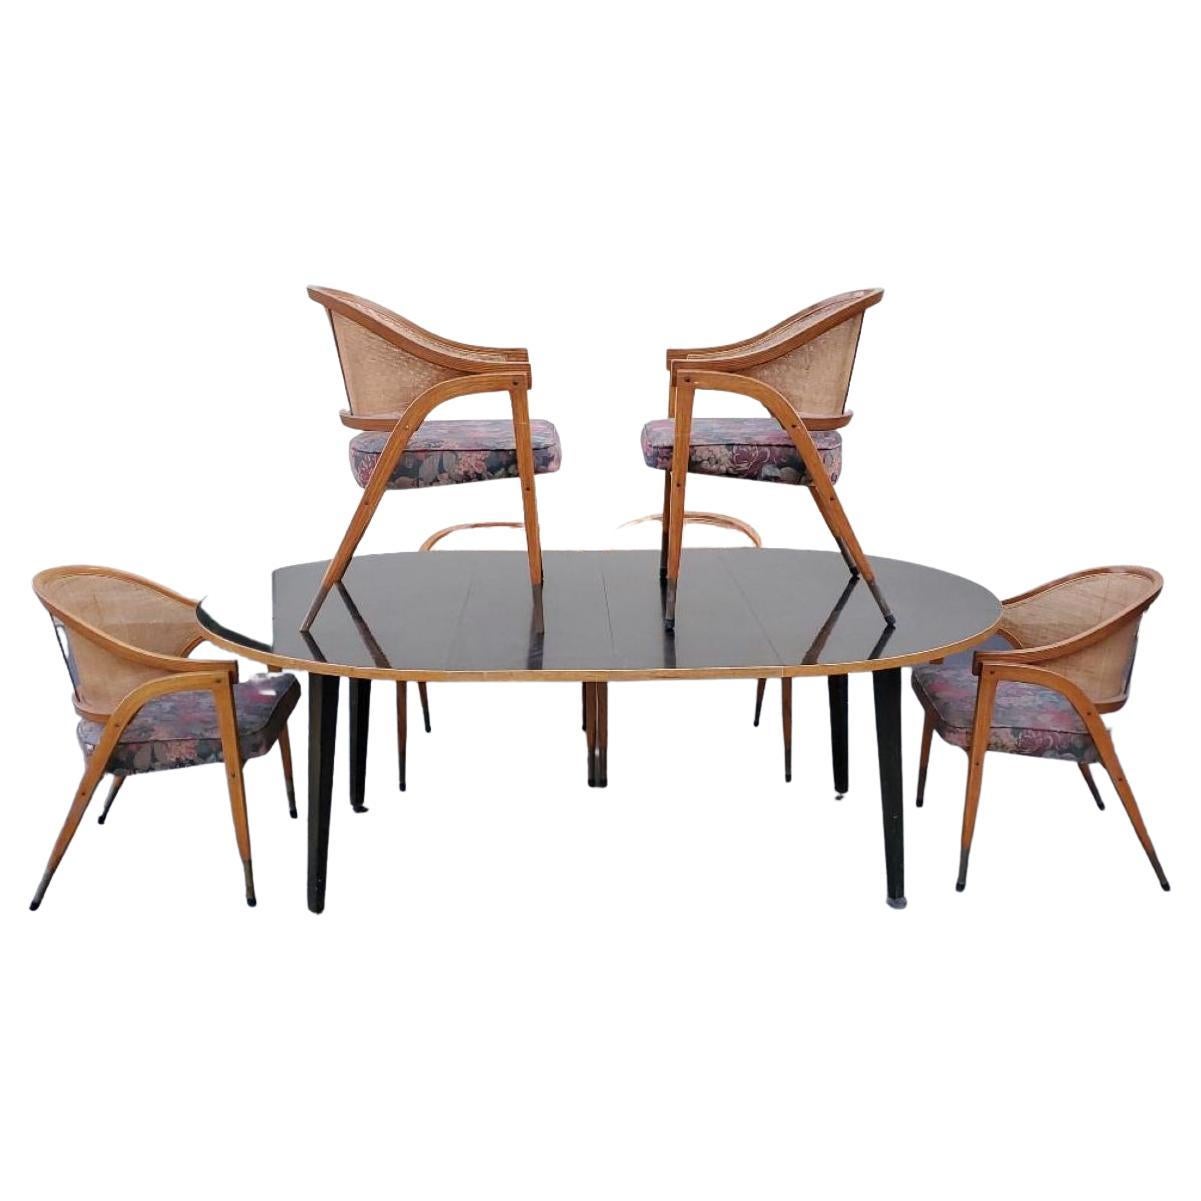 1950s Edward Wormley for Dunbar Extension Dining Set 6 Chairs 2 Leaves For Sale